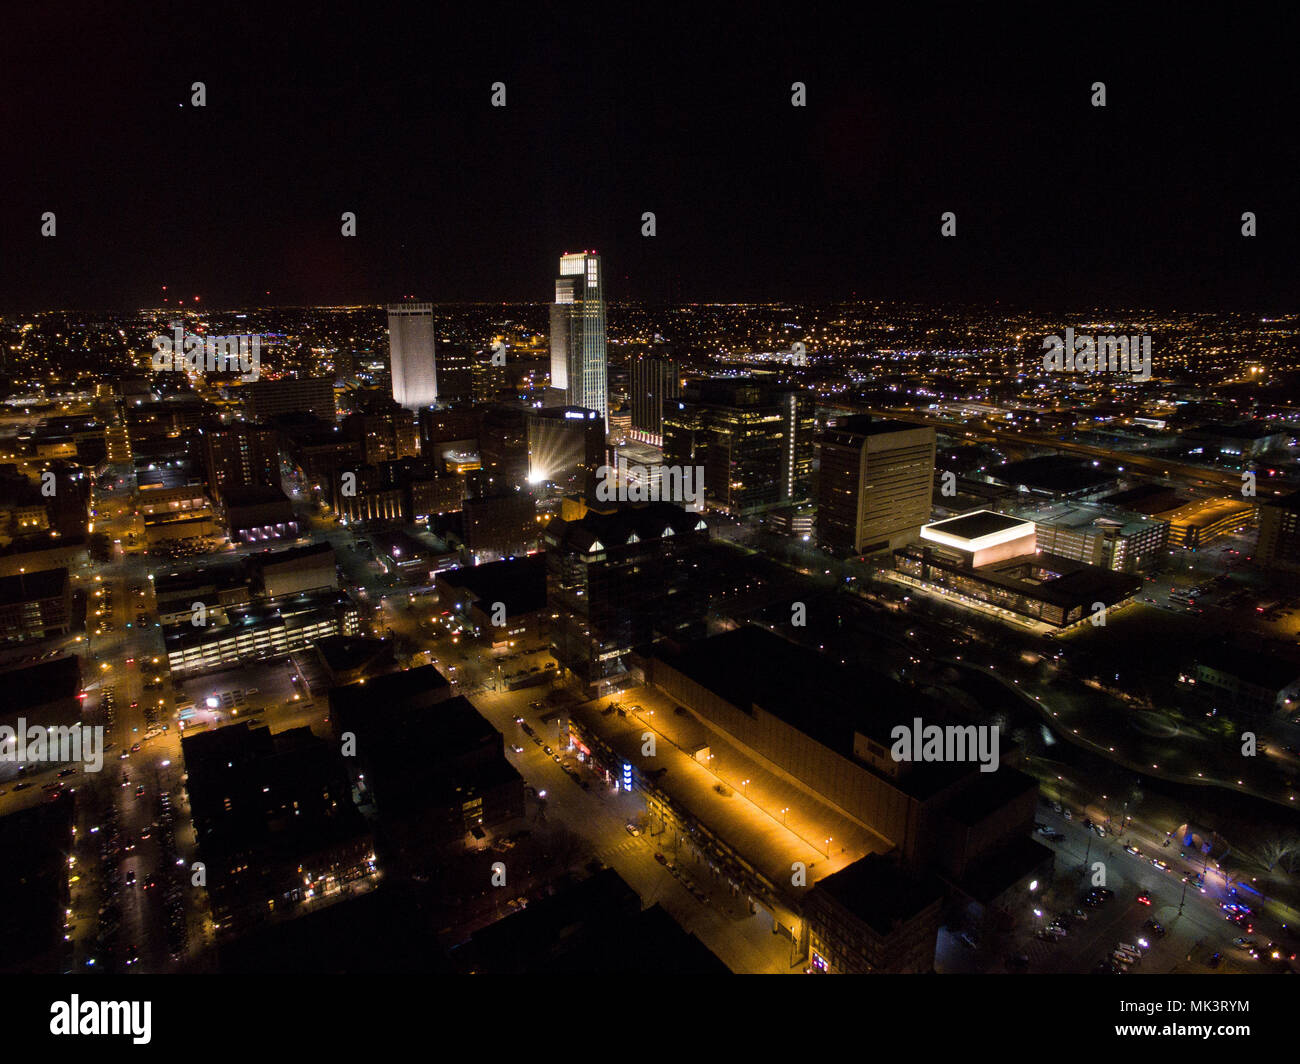 Omaha Is A Major Urban Center And Largest City In The State Of Nebraska